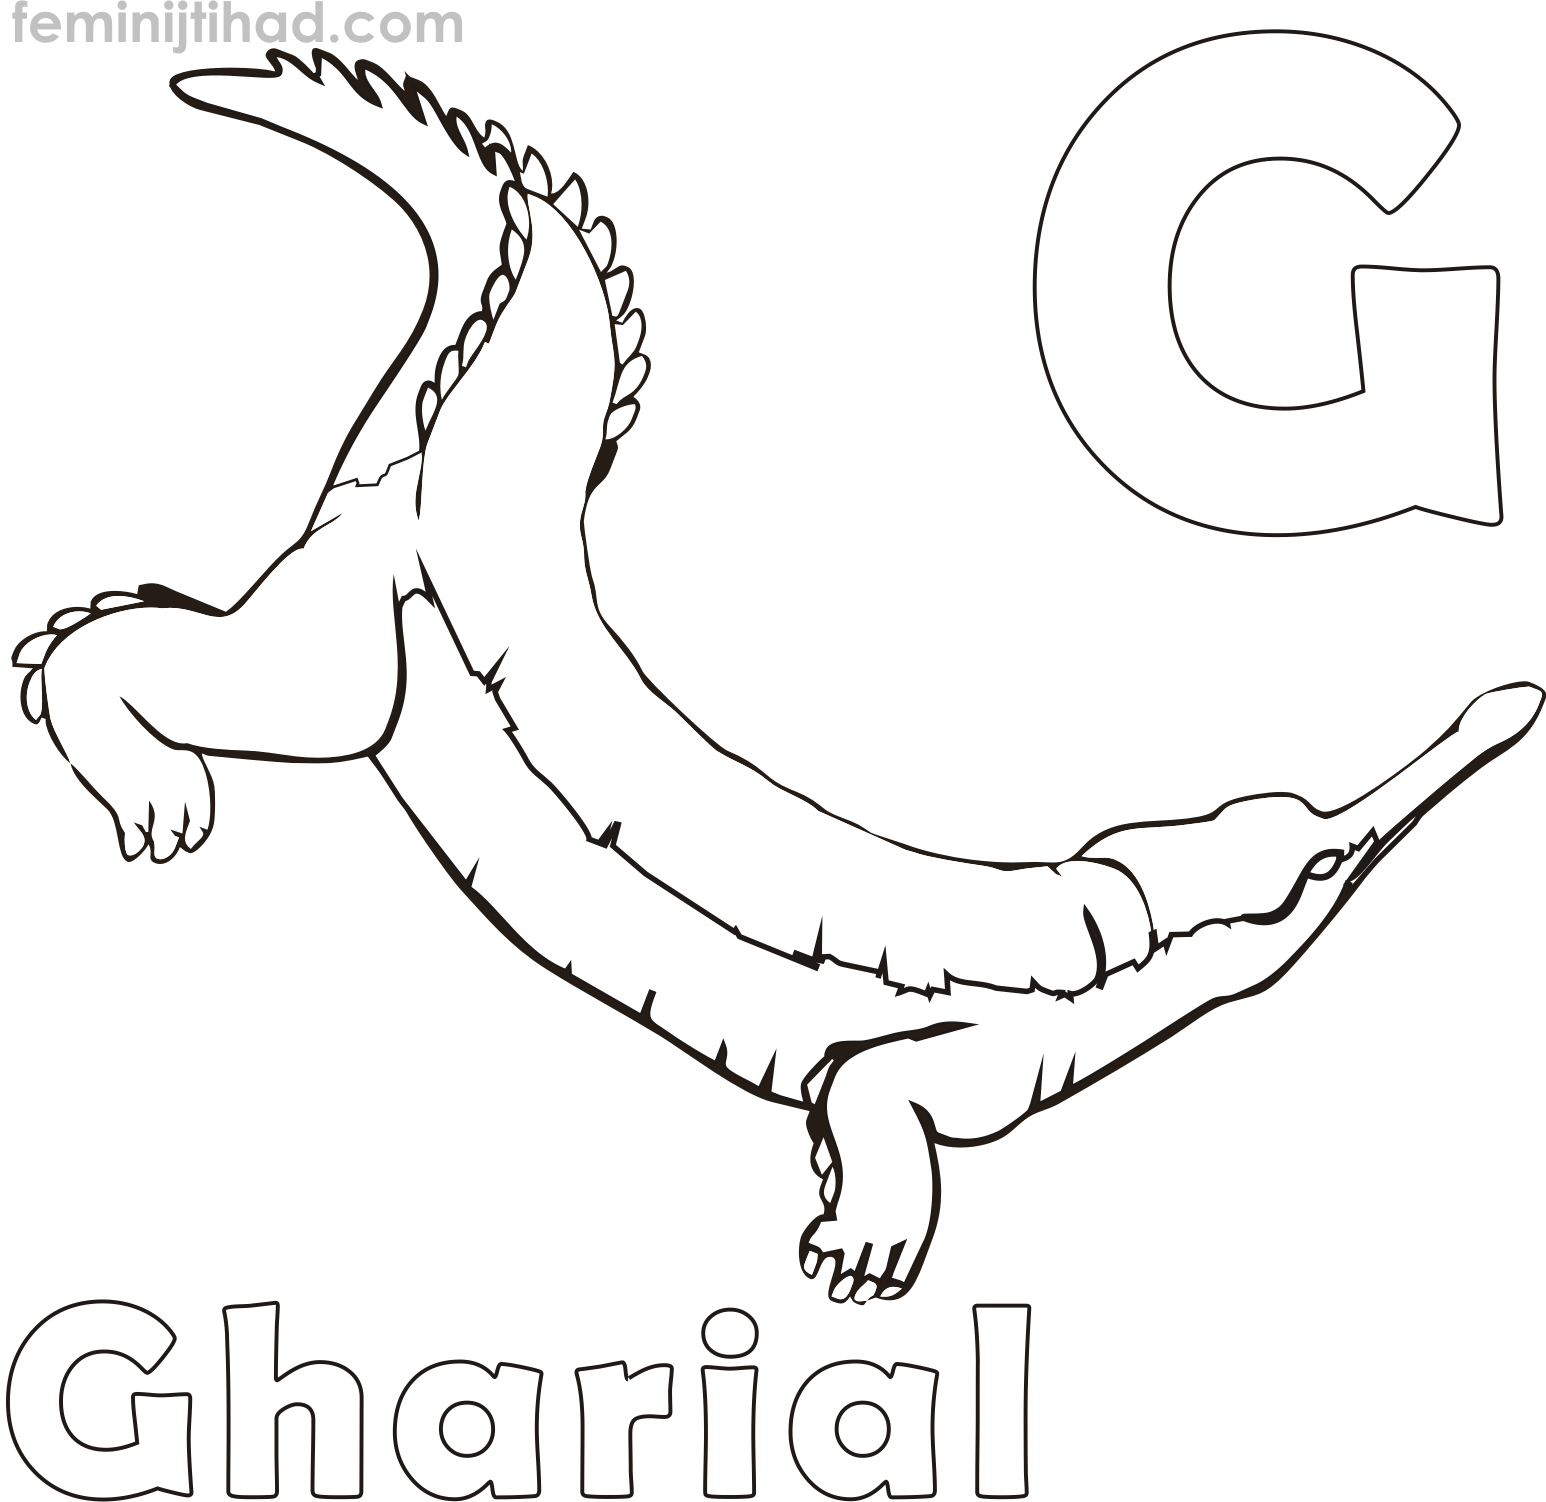 Free Gharial Colorin Page to Print